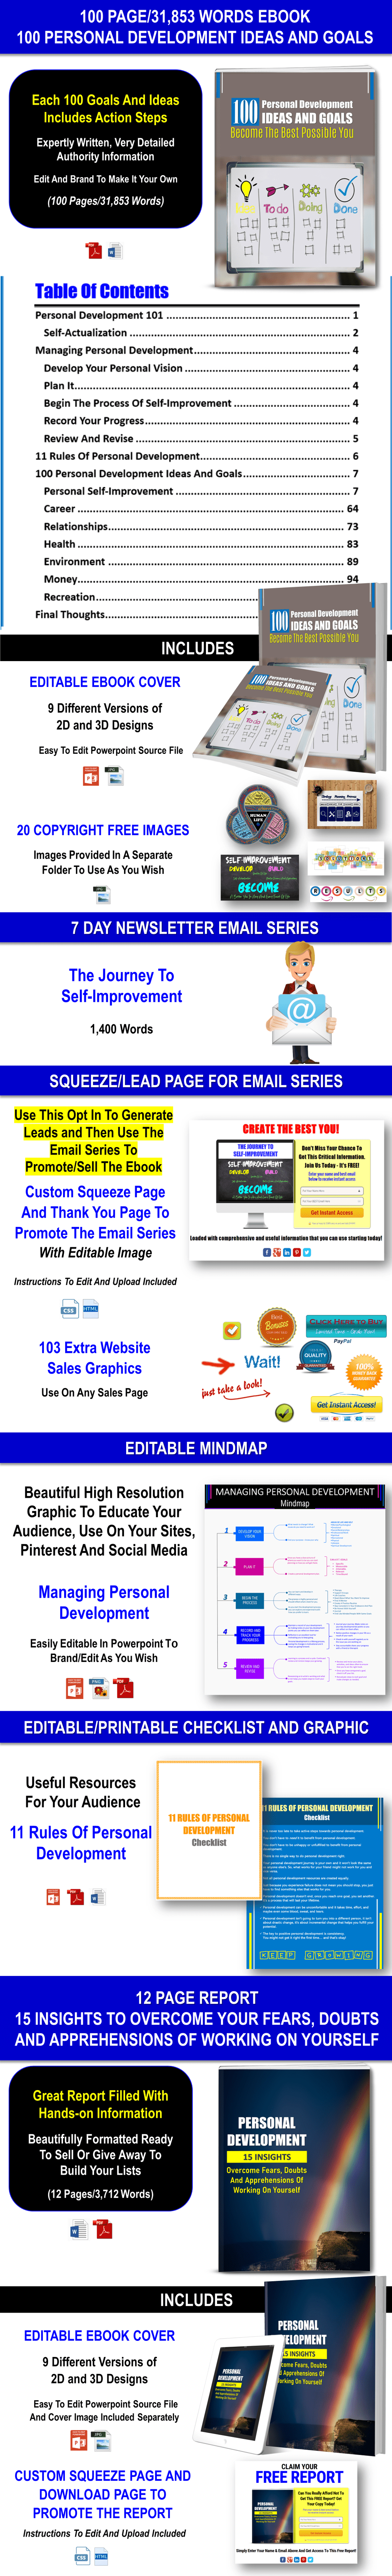 100 Personal Development Goals And Ideas Content Pack With PLR Rights